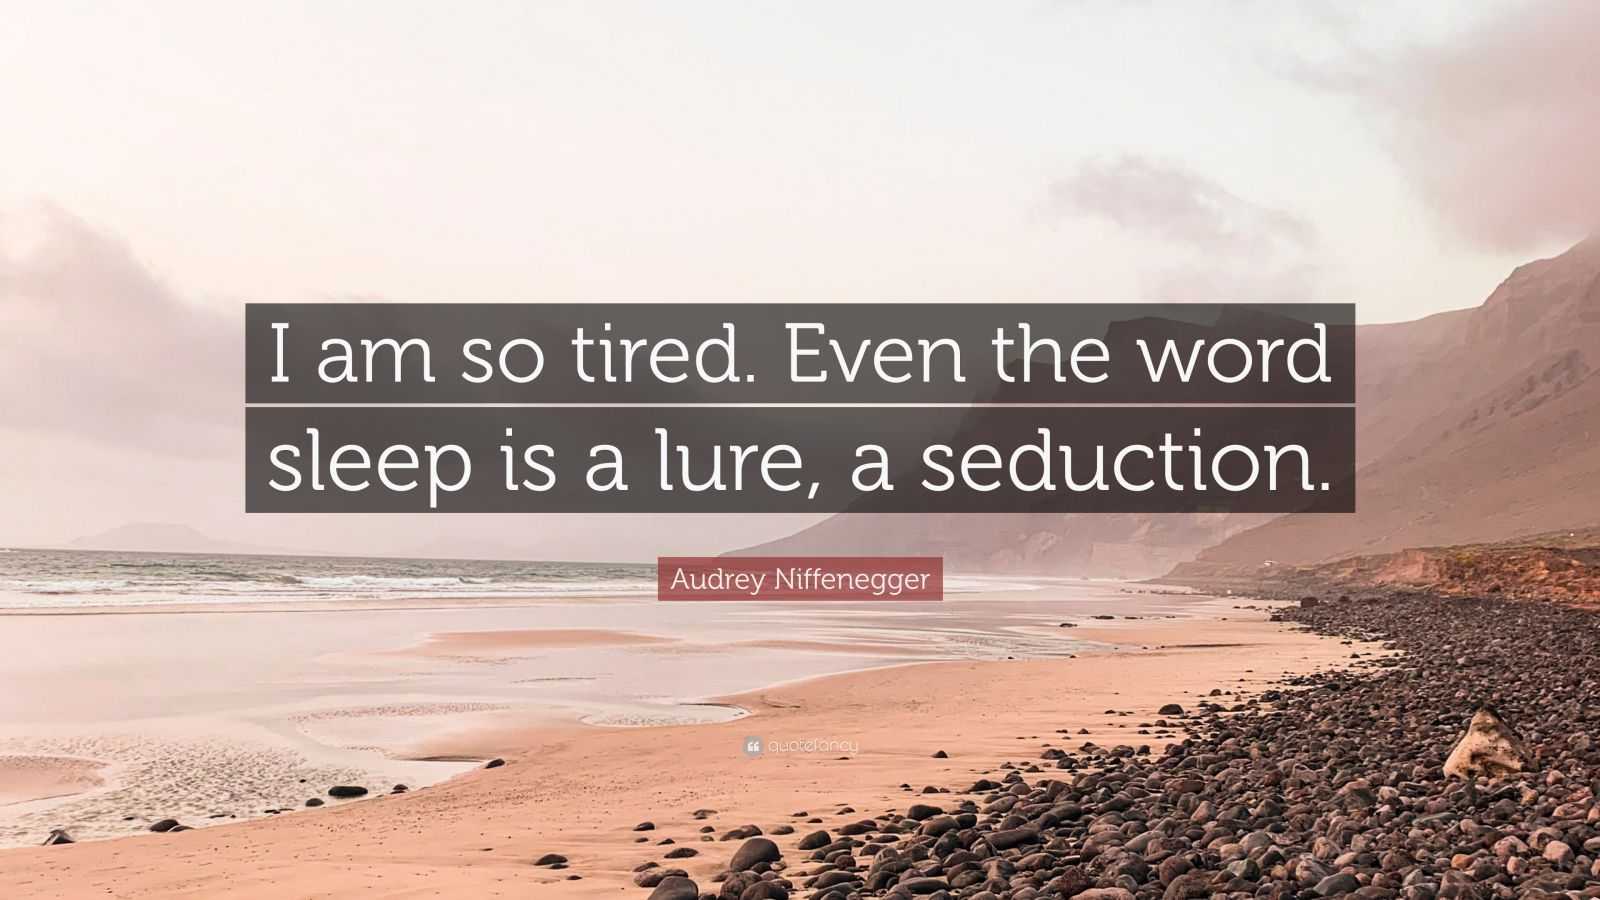 Audrey Niffenegger Quote: “I am so tired. Even the word sleep is a lure, a  seduction.”